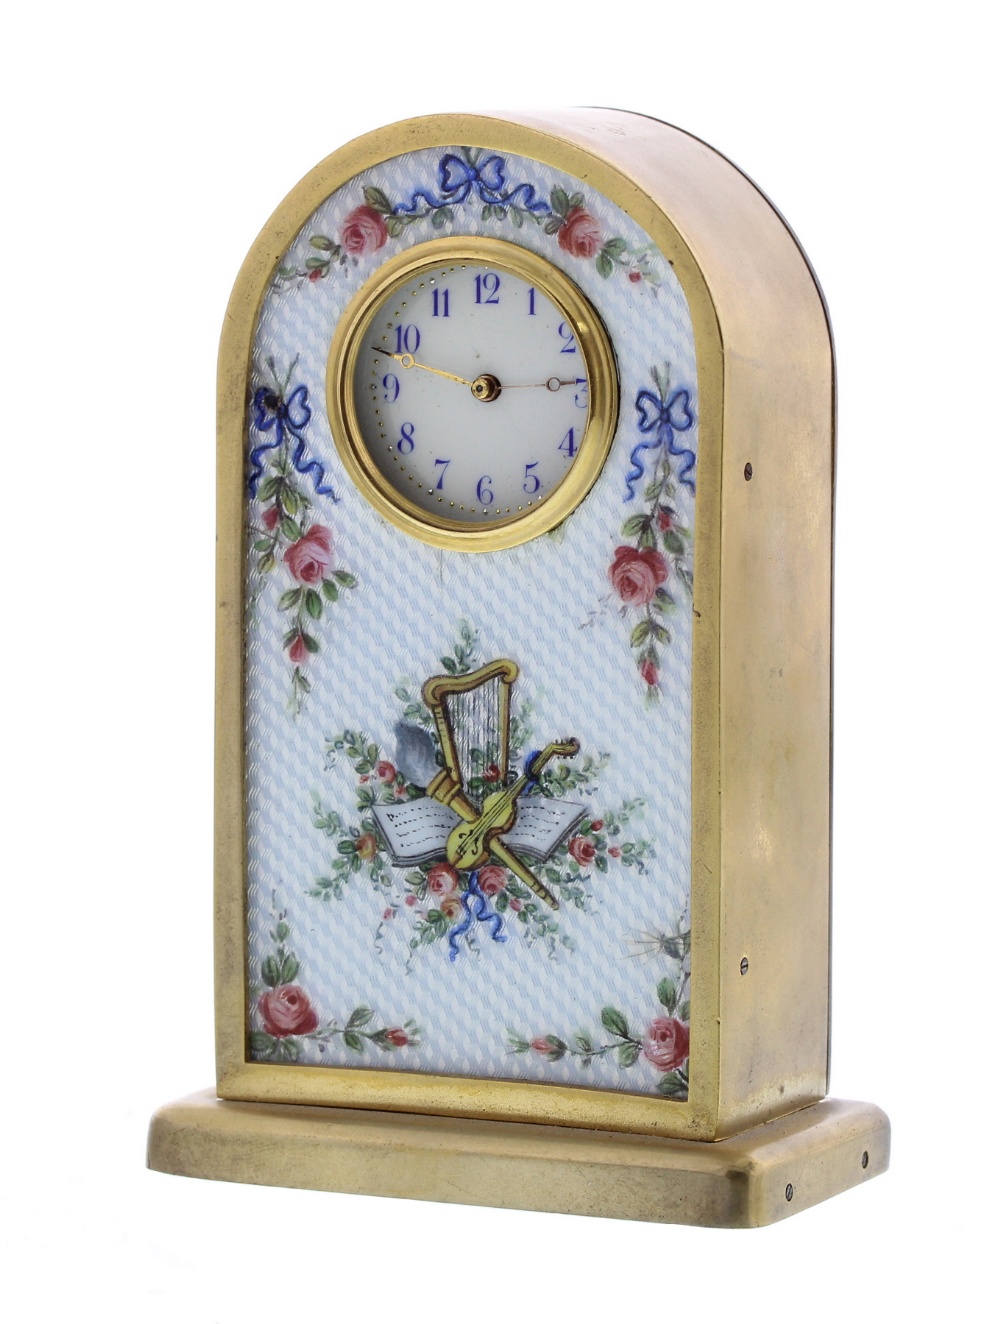 Miniature gilt metal and guillouche enamel clock, within a rounded arched case decorated with